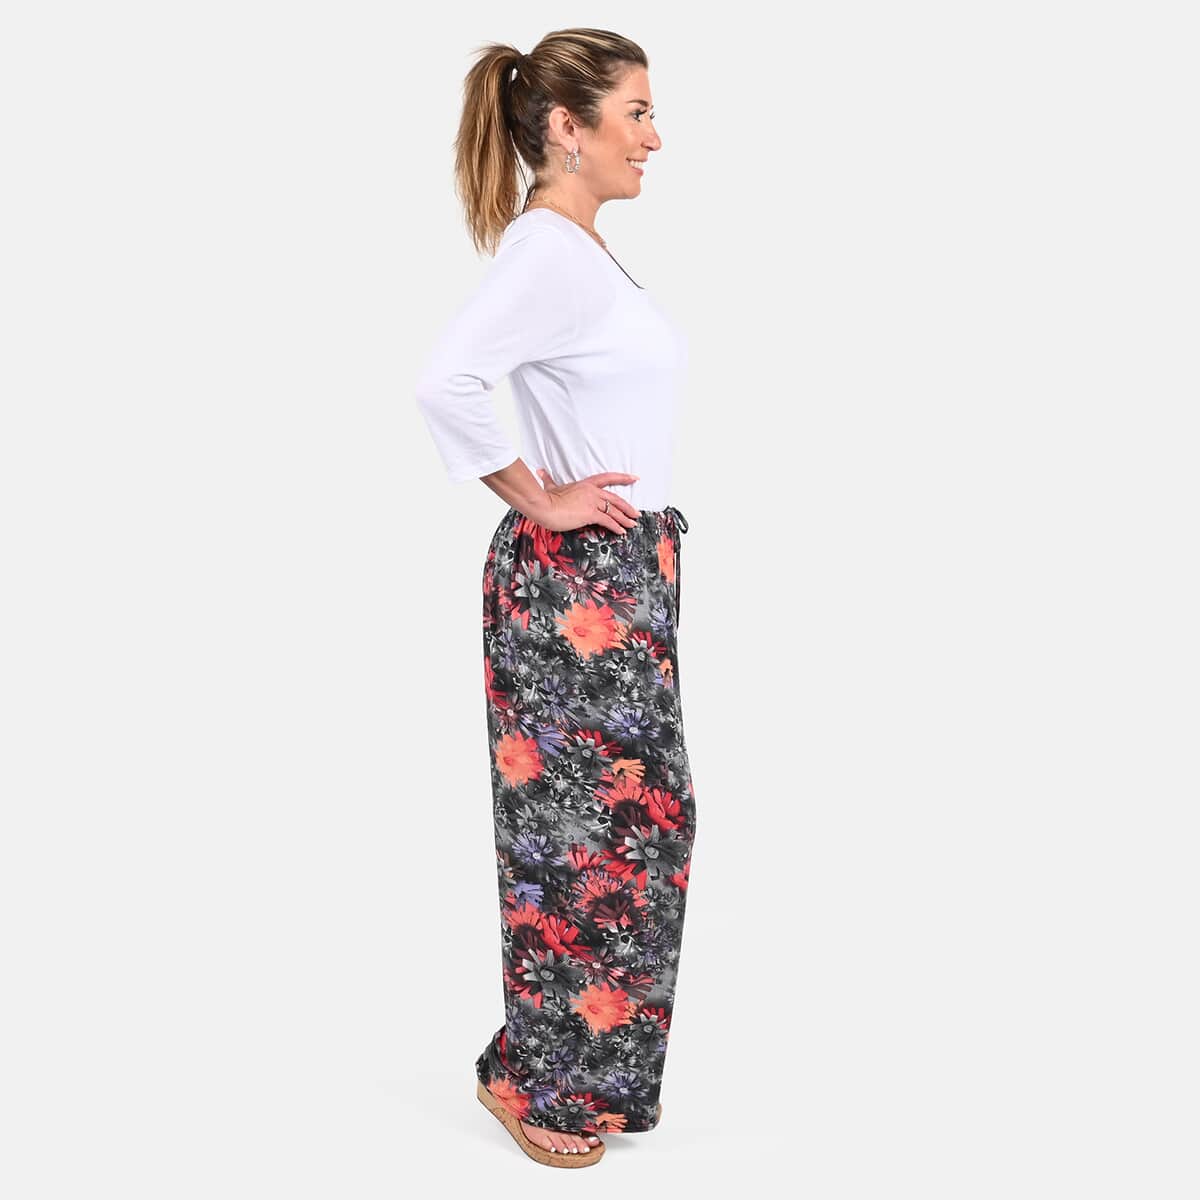 Tamsy Black with Orange Floral Printed Trouser - One Size Fits Most image number 2